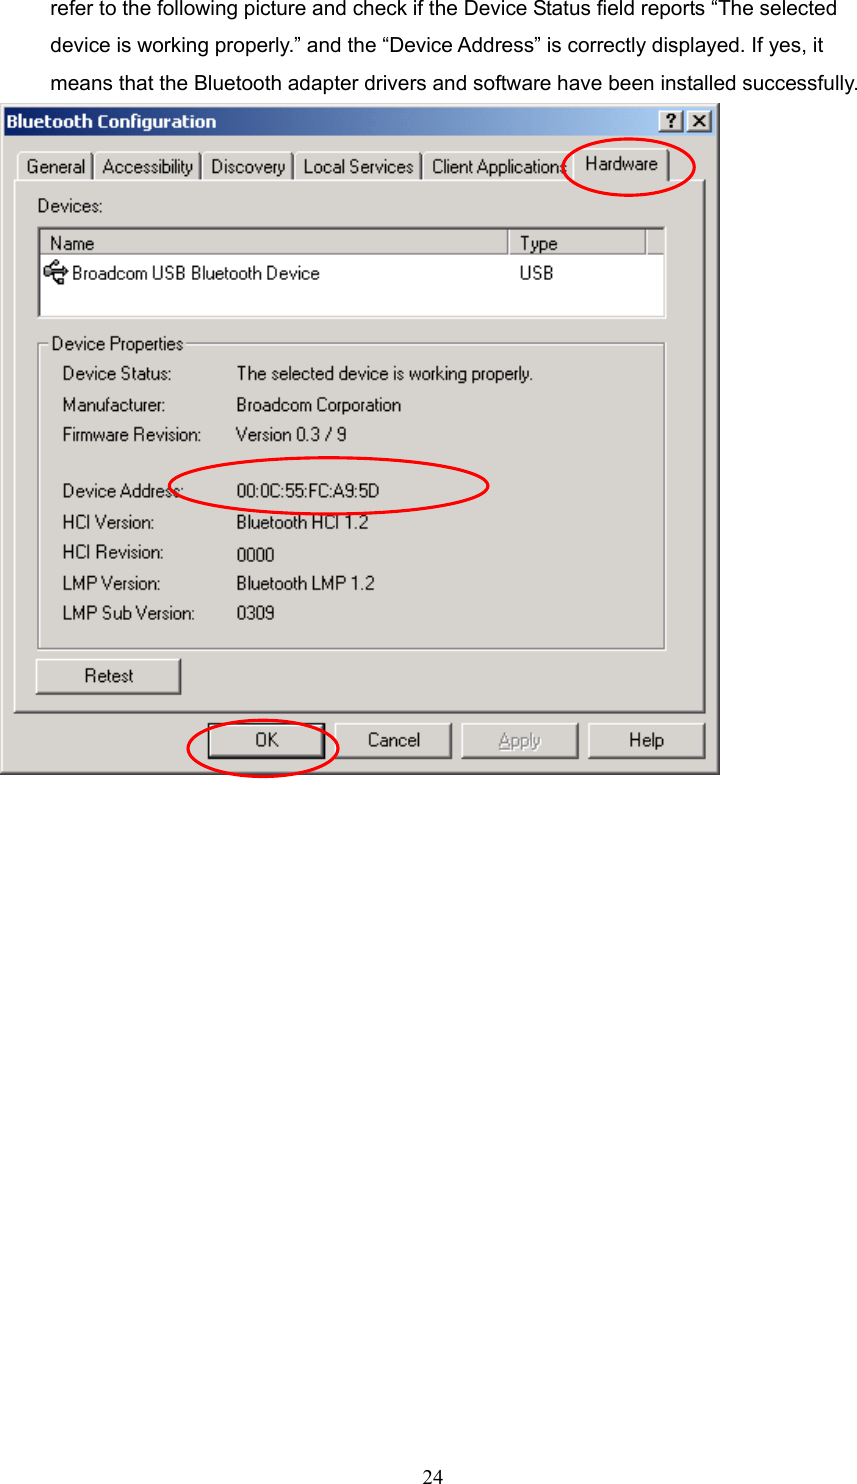  24 refer to the following picture and check if the Device Status field reports “The selected device is working properly.” and the “Device Address” is correctly displayed. If yes, it means that the Bluetooth adapter drivers and software have been installed successfully.   